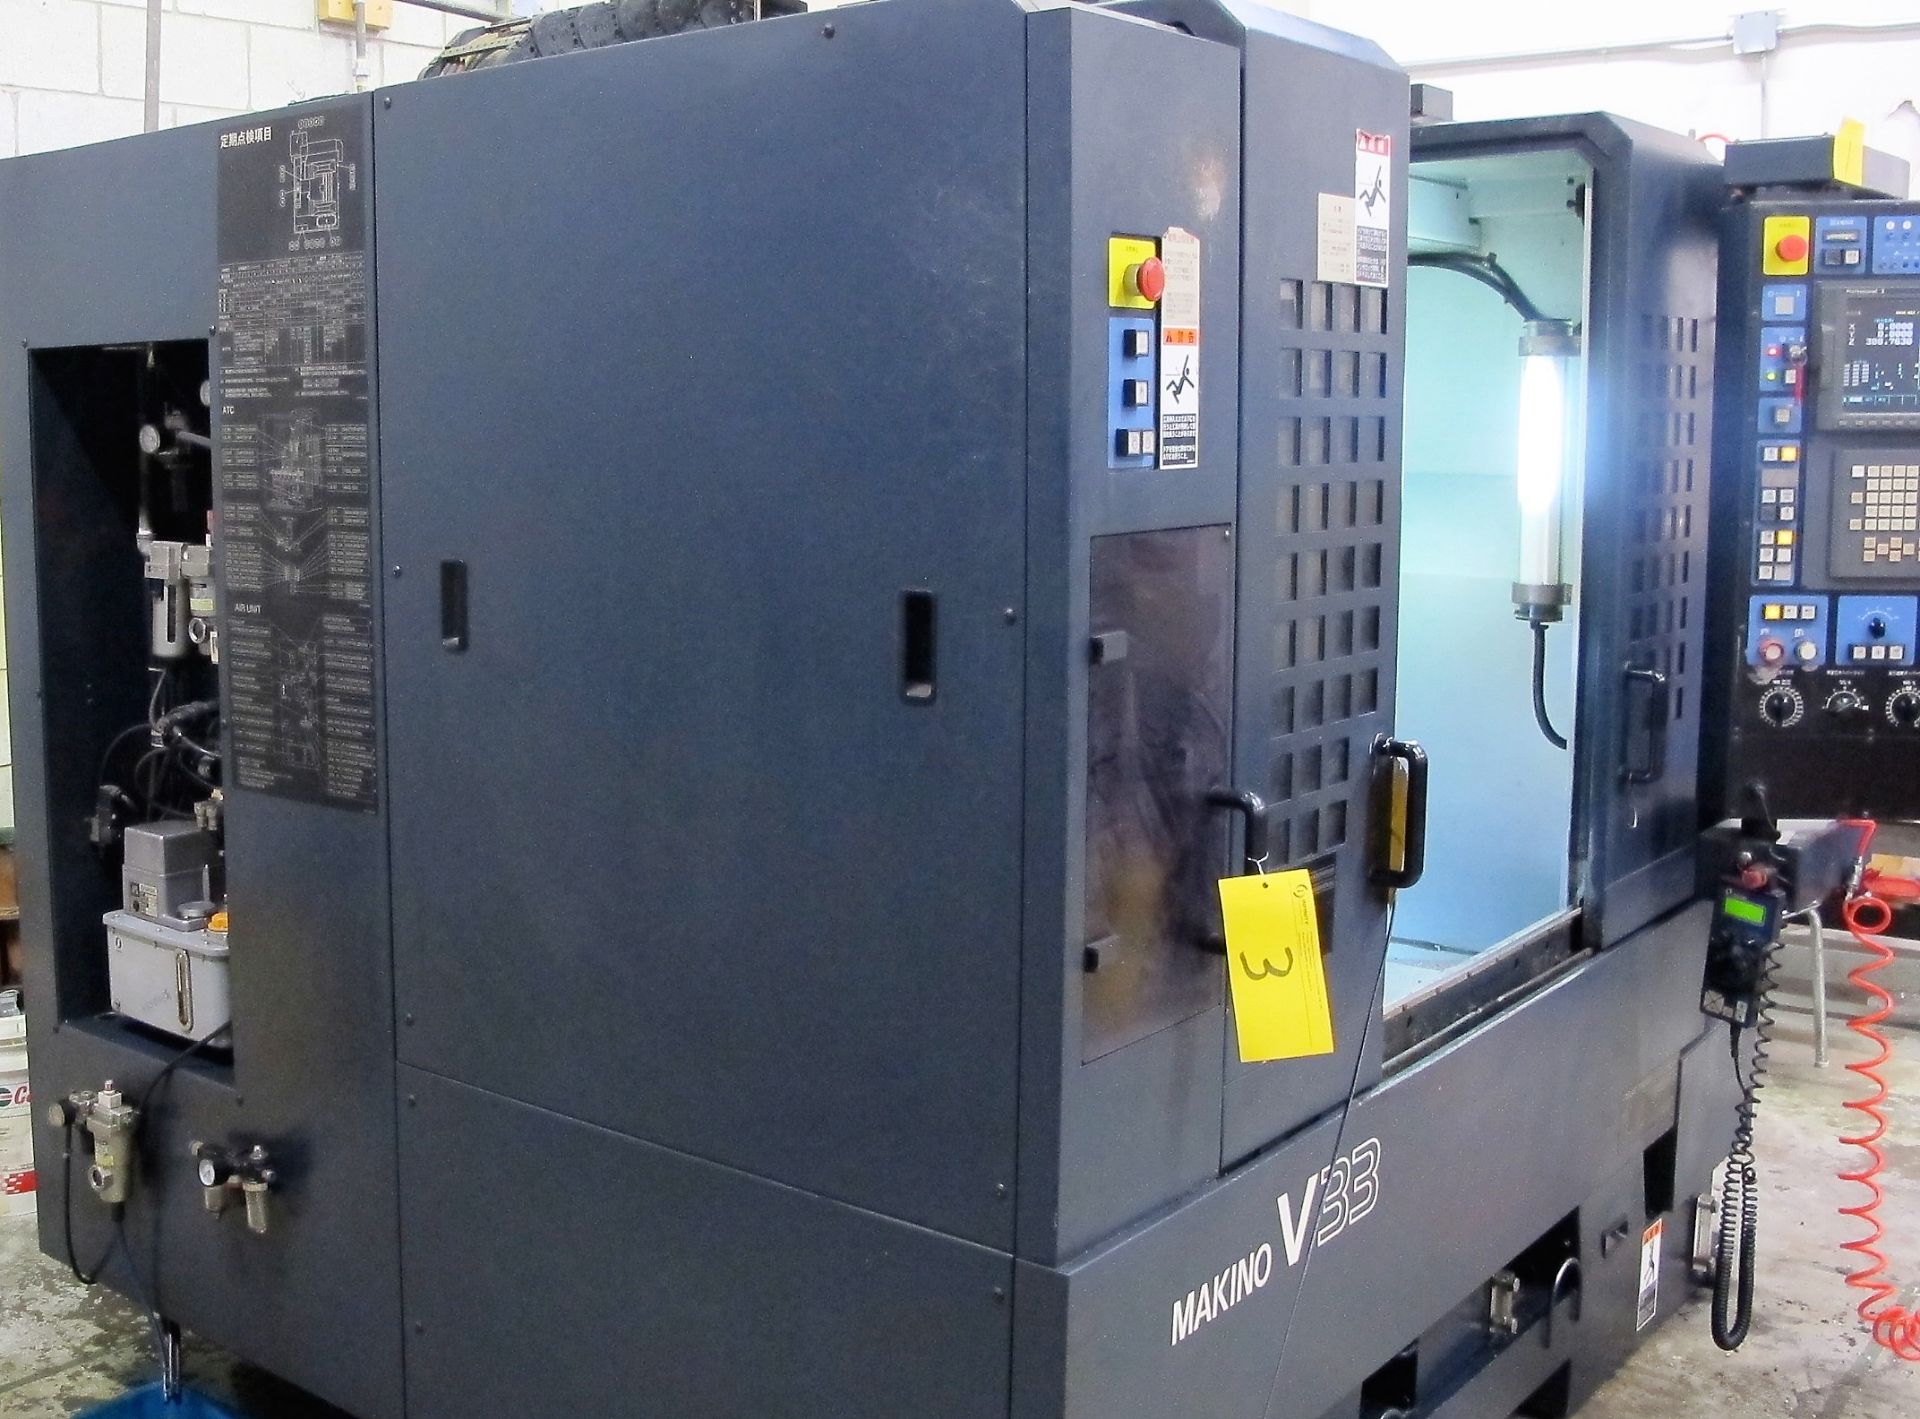 2001 MAKINO V33 HIGH SPEED CNC VERTICAL MACHINING CENTER, PROFESSIONAL 3 CONTROL, 15 ATC, 16" X 30" - Image 6 of 8